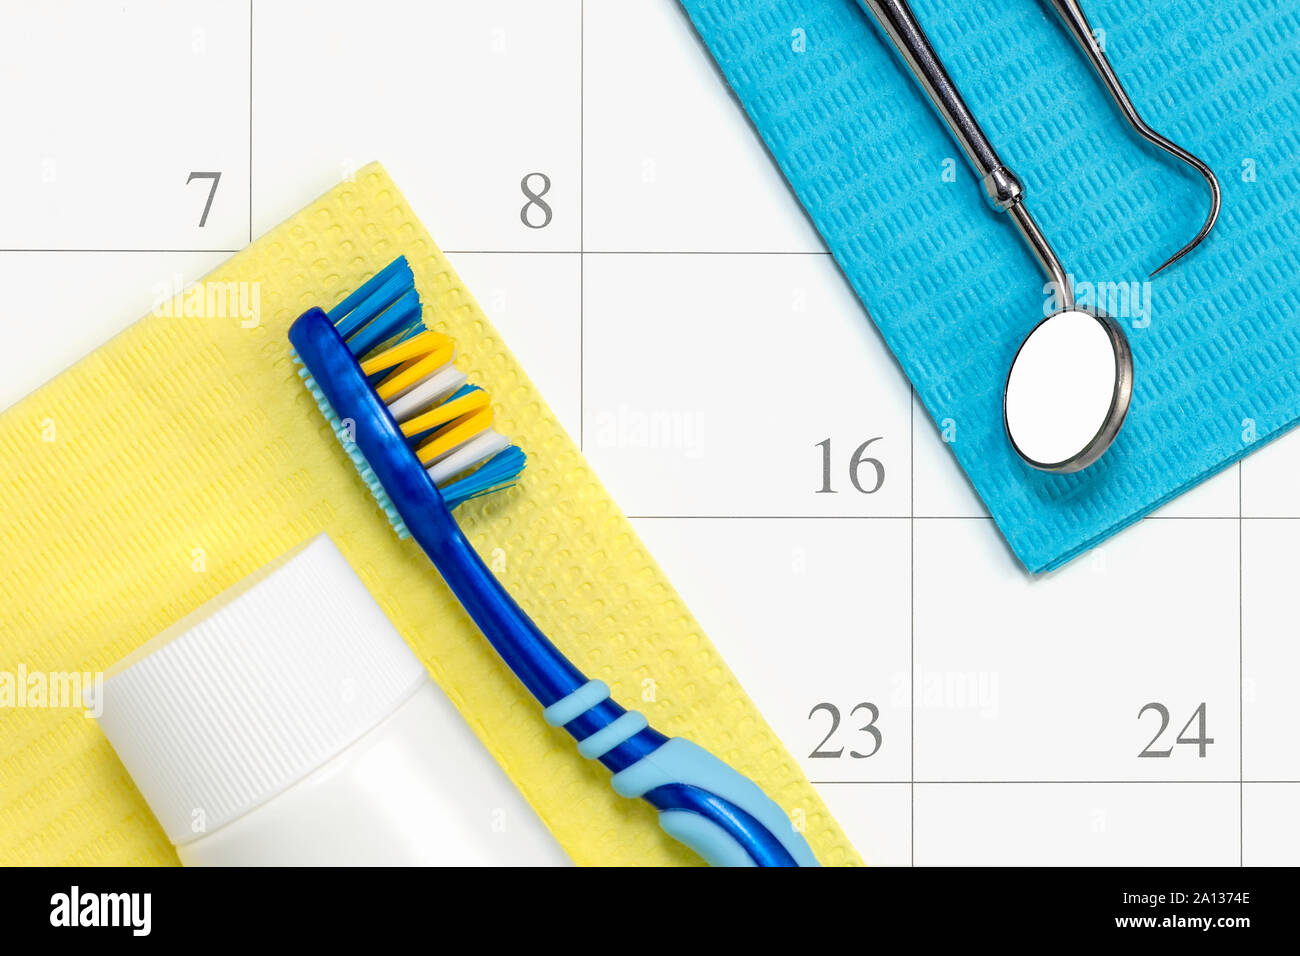 Dentist appointment and dental check up health care concept reminder in month calendar with toothbrush dental tools and toothpaste. Stock Photo